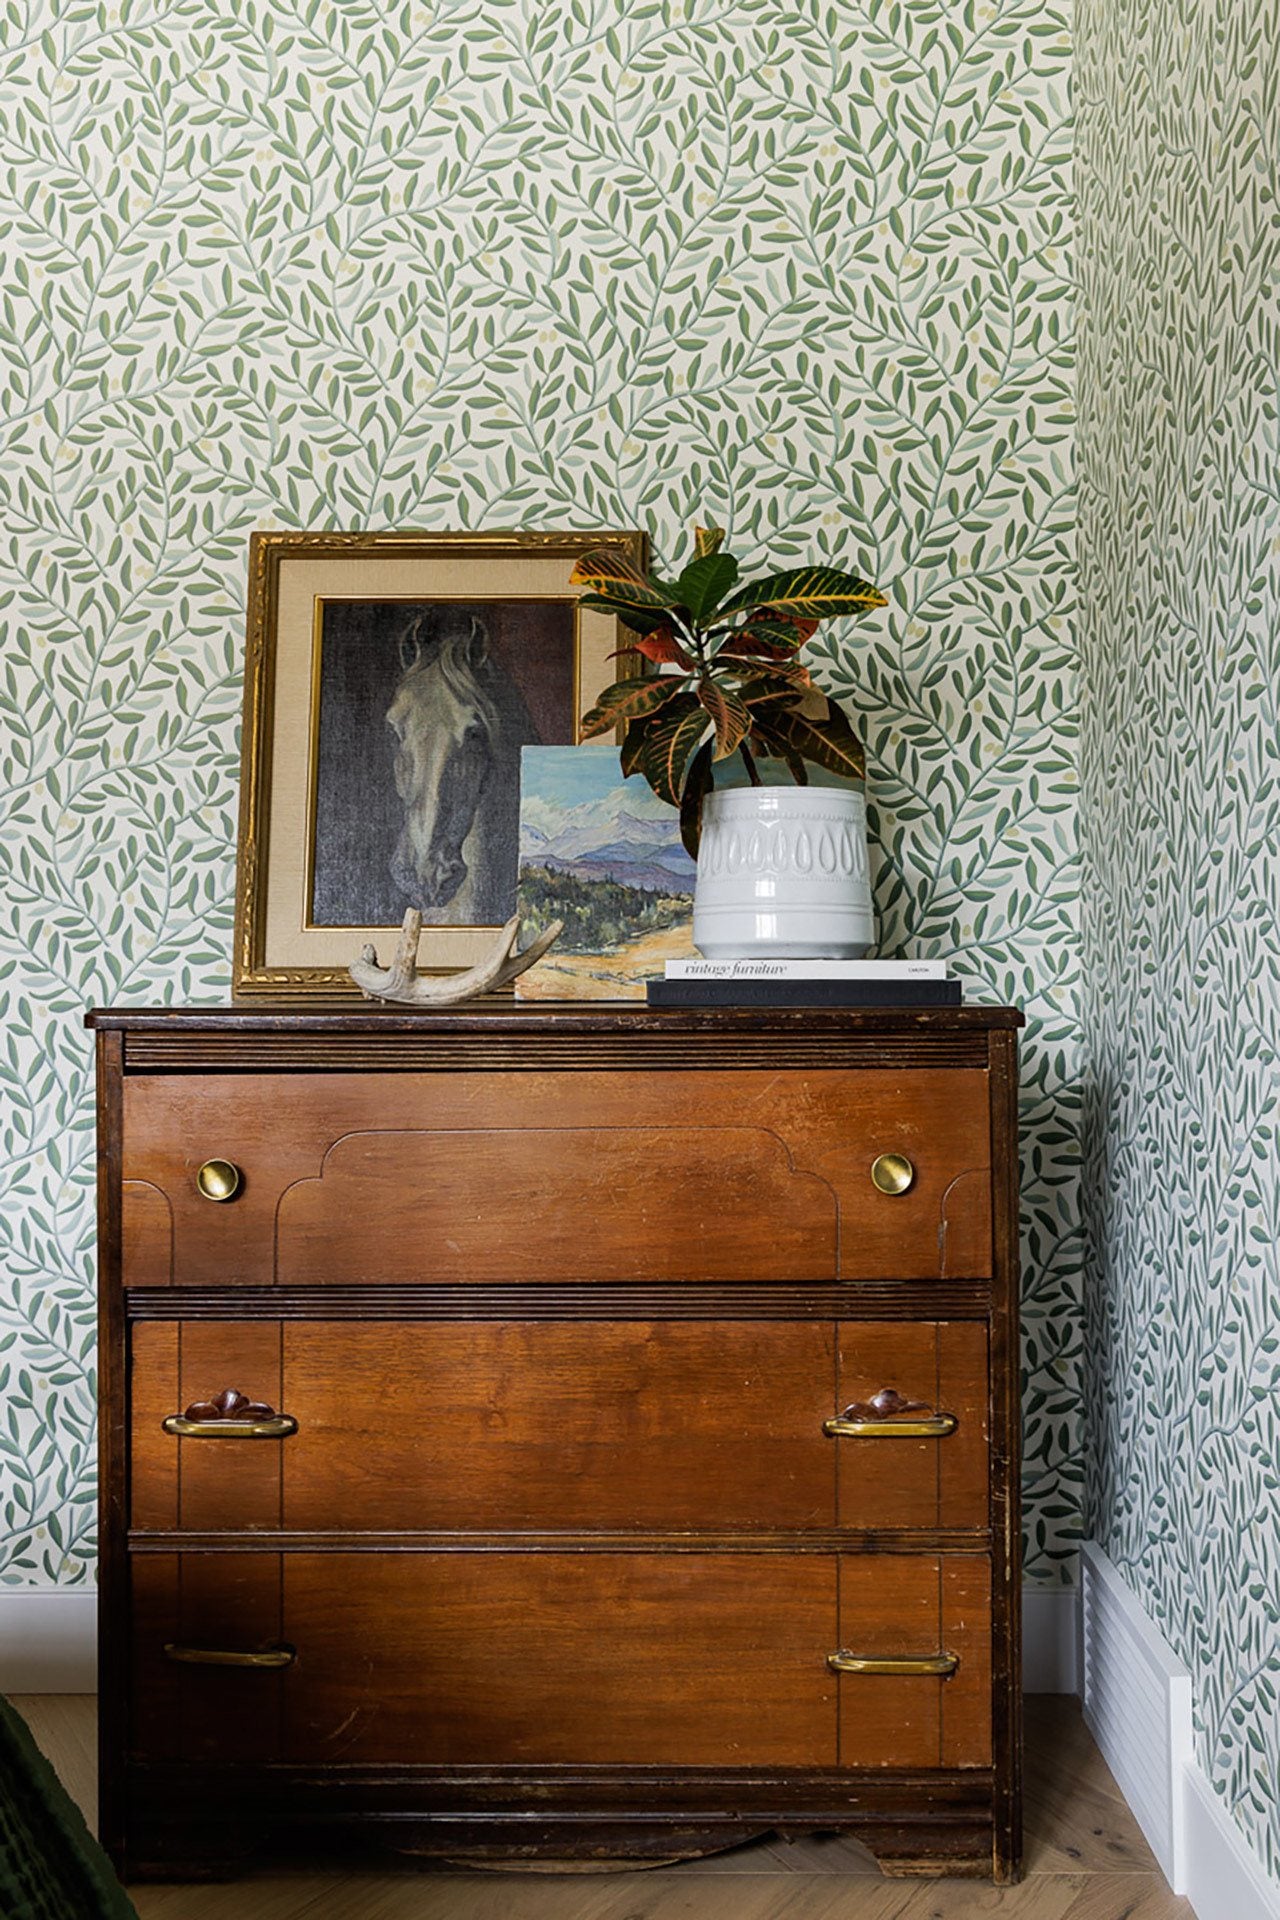 Aly of Alykhan Velji Designs used Olive Grove Wallpaper in the guest bedroom | Home makeover using Hygge & West walllpapers